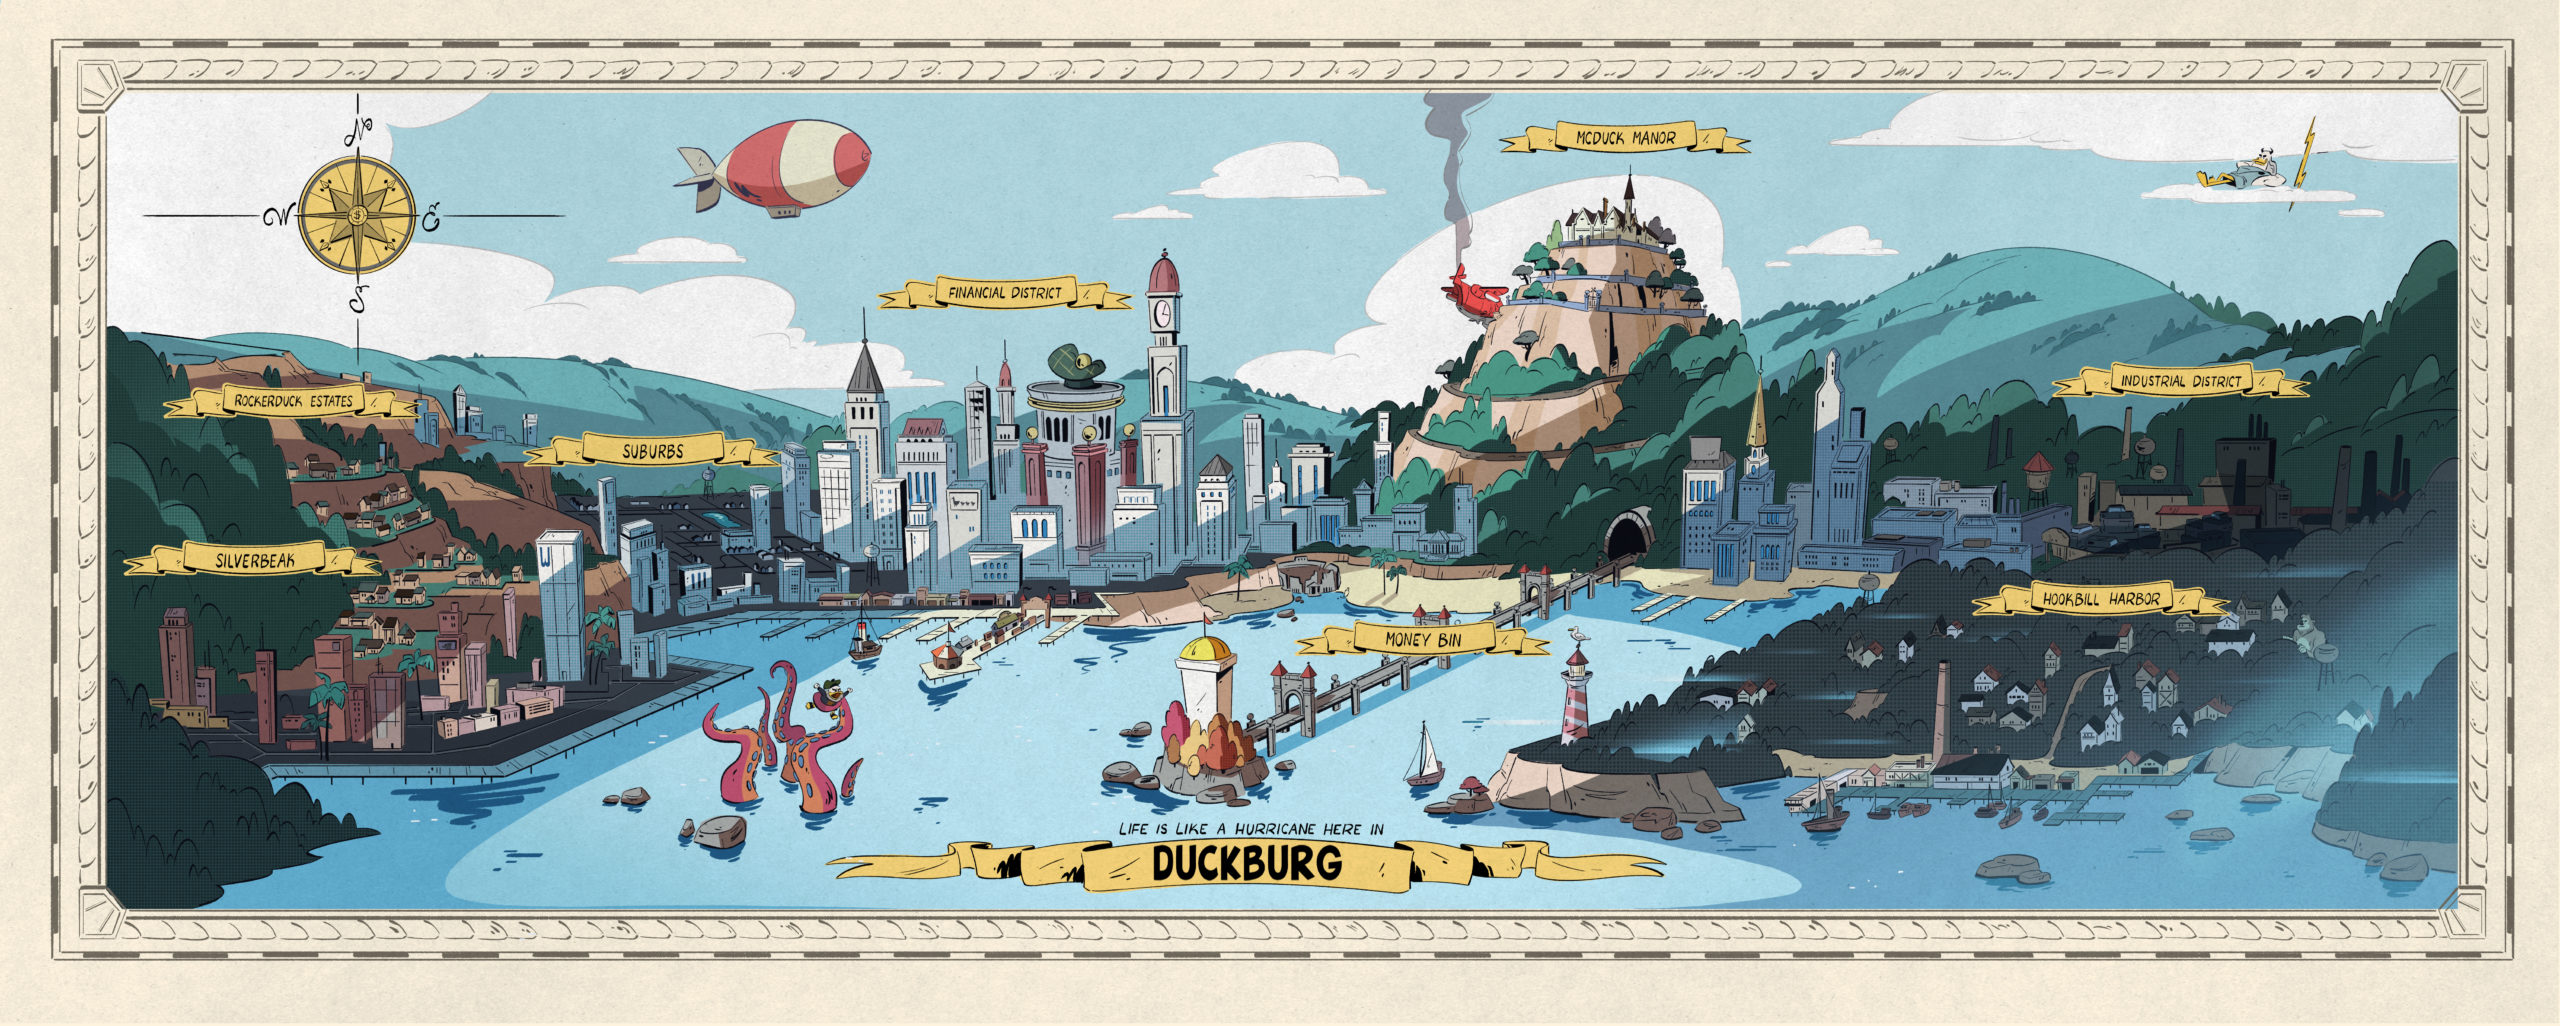 Hipster Ducks, Money Bins And Gods All Show Up In This New DuckTales Map